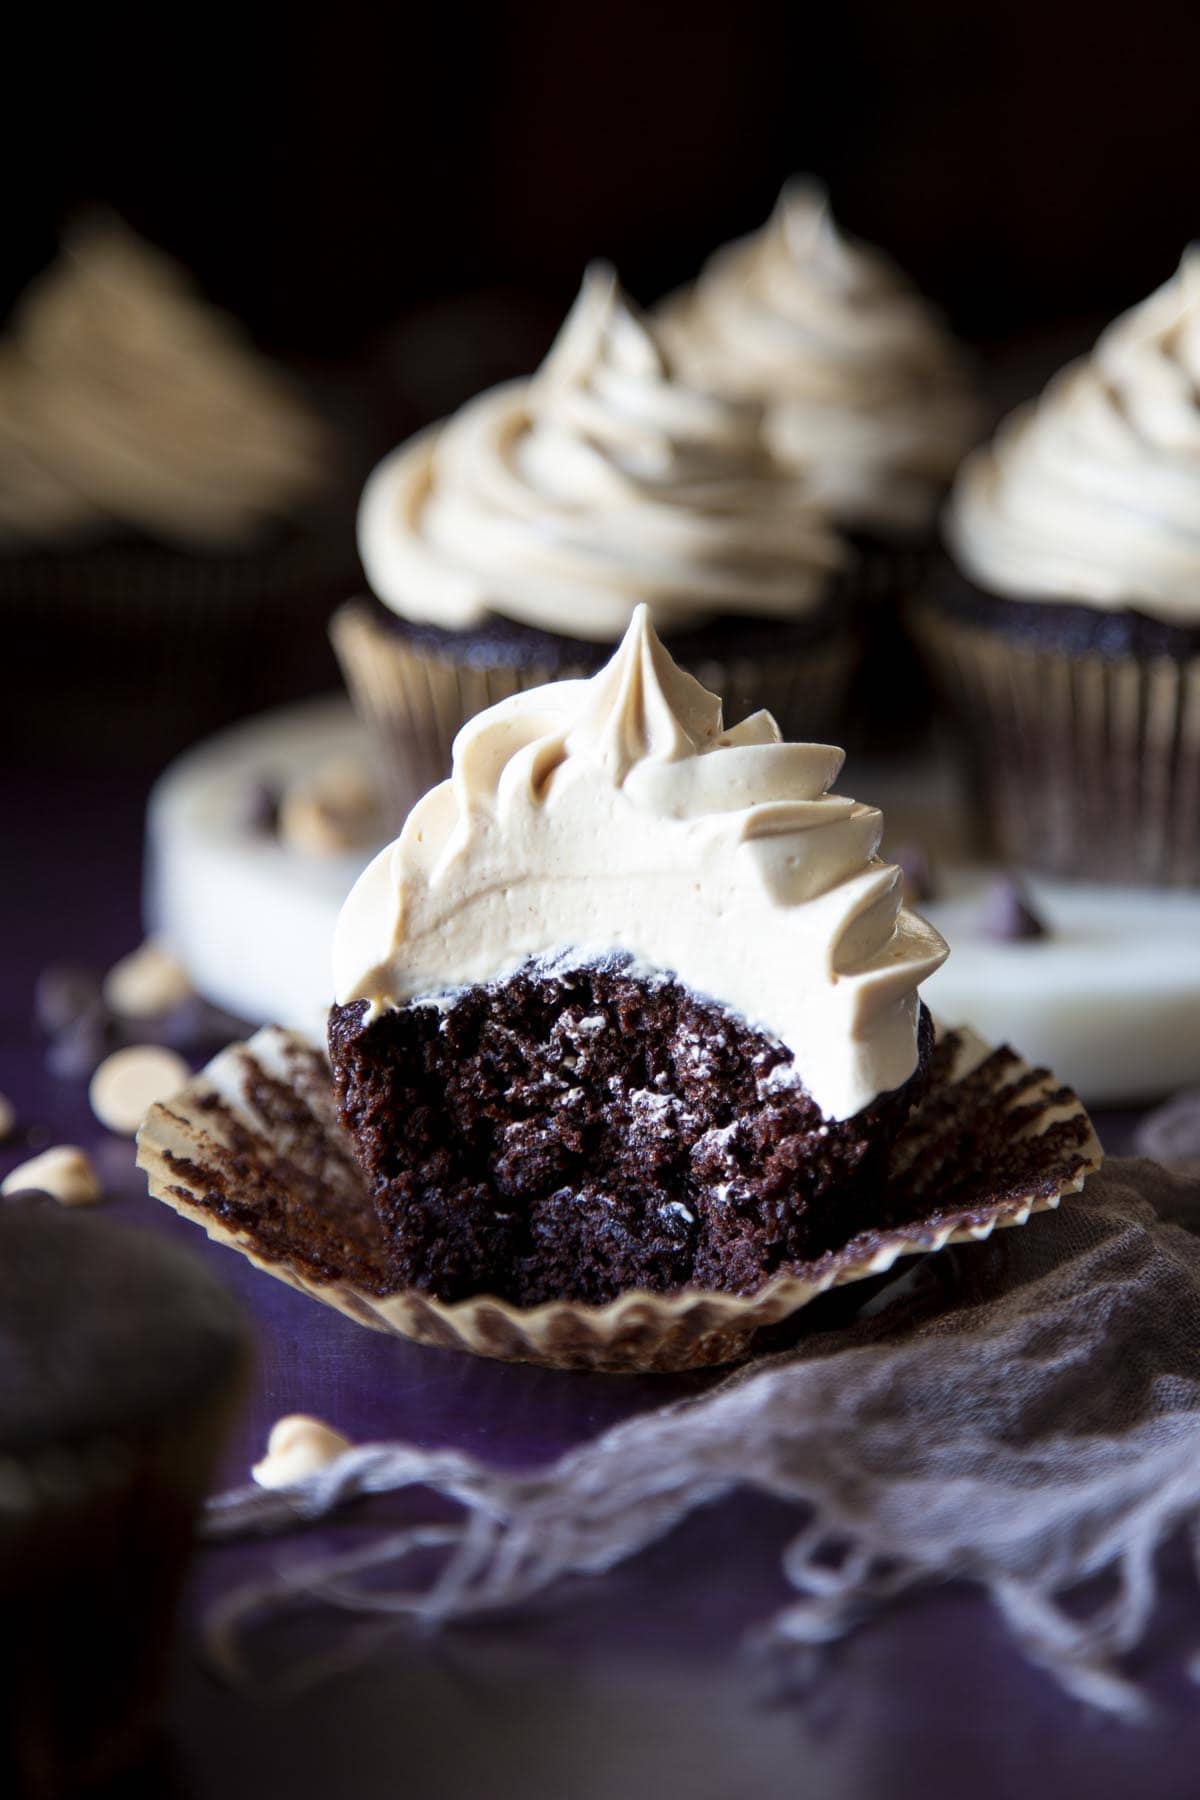 A chocolate cupcake with peanut butter frosting, with a bite taken out of it